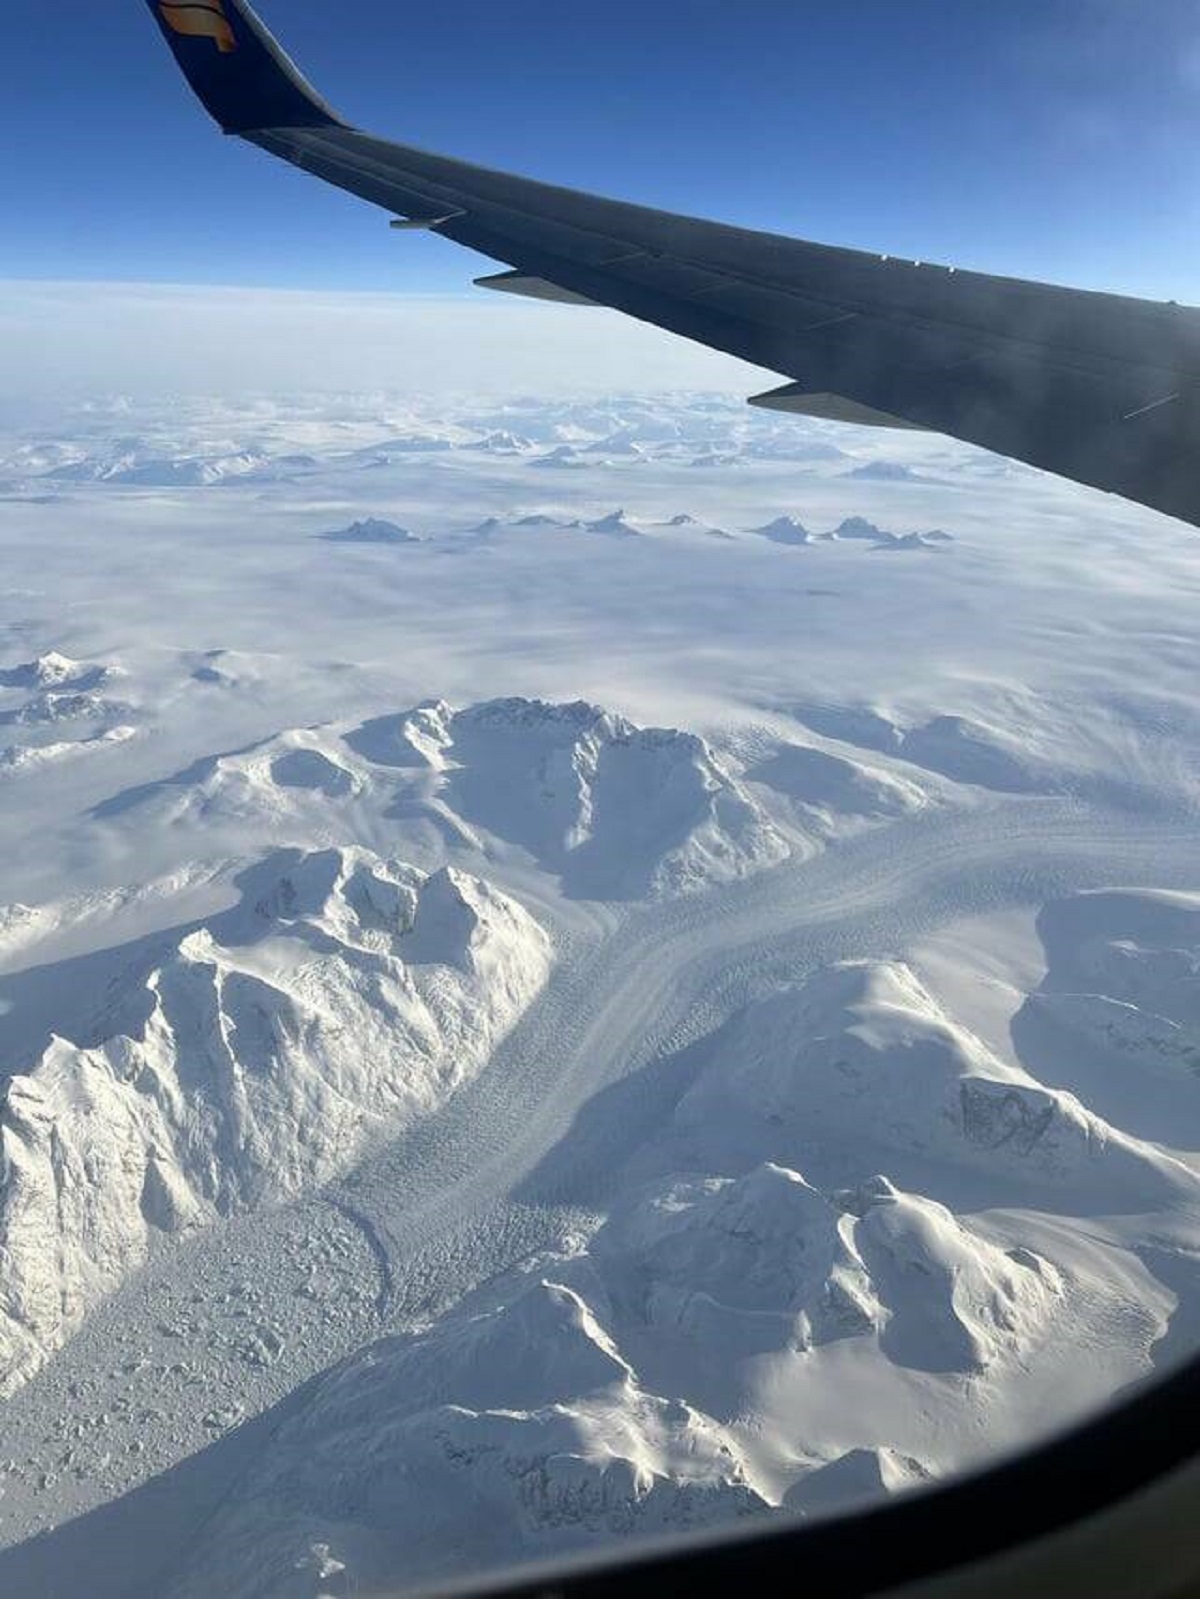 "This icefall in Greenland I saw from a plane"